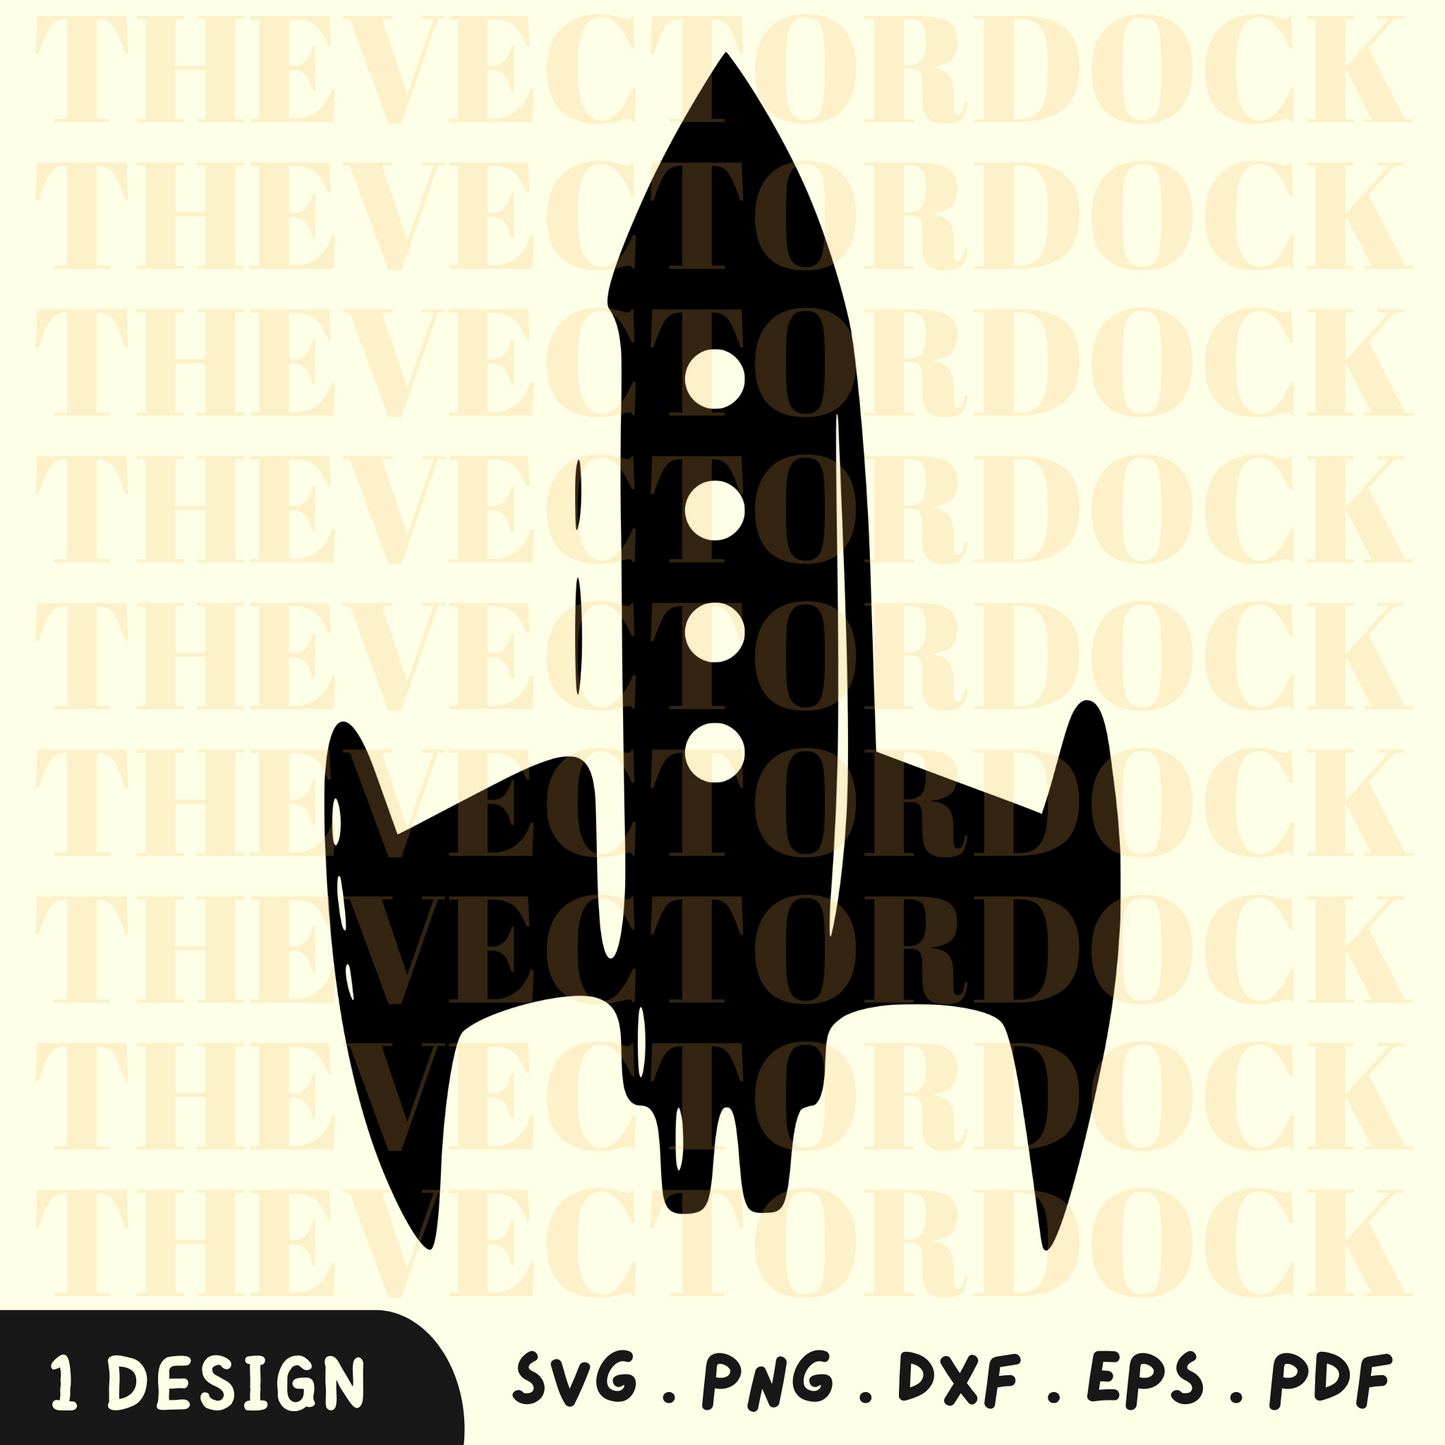 Starship SVG Design, Starship SVG, Starship, Starship PNG, Spacecraft, Starship Vector